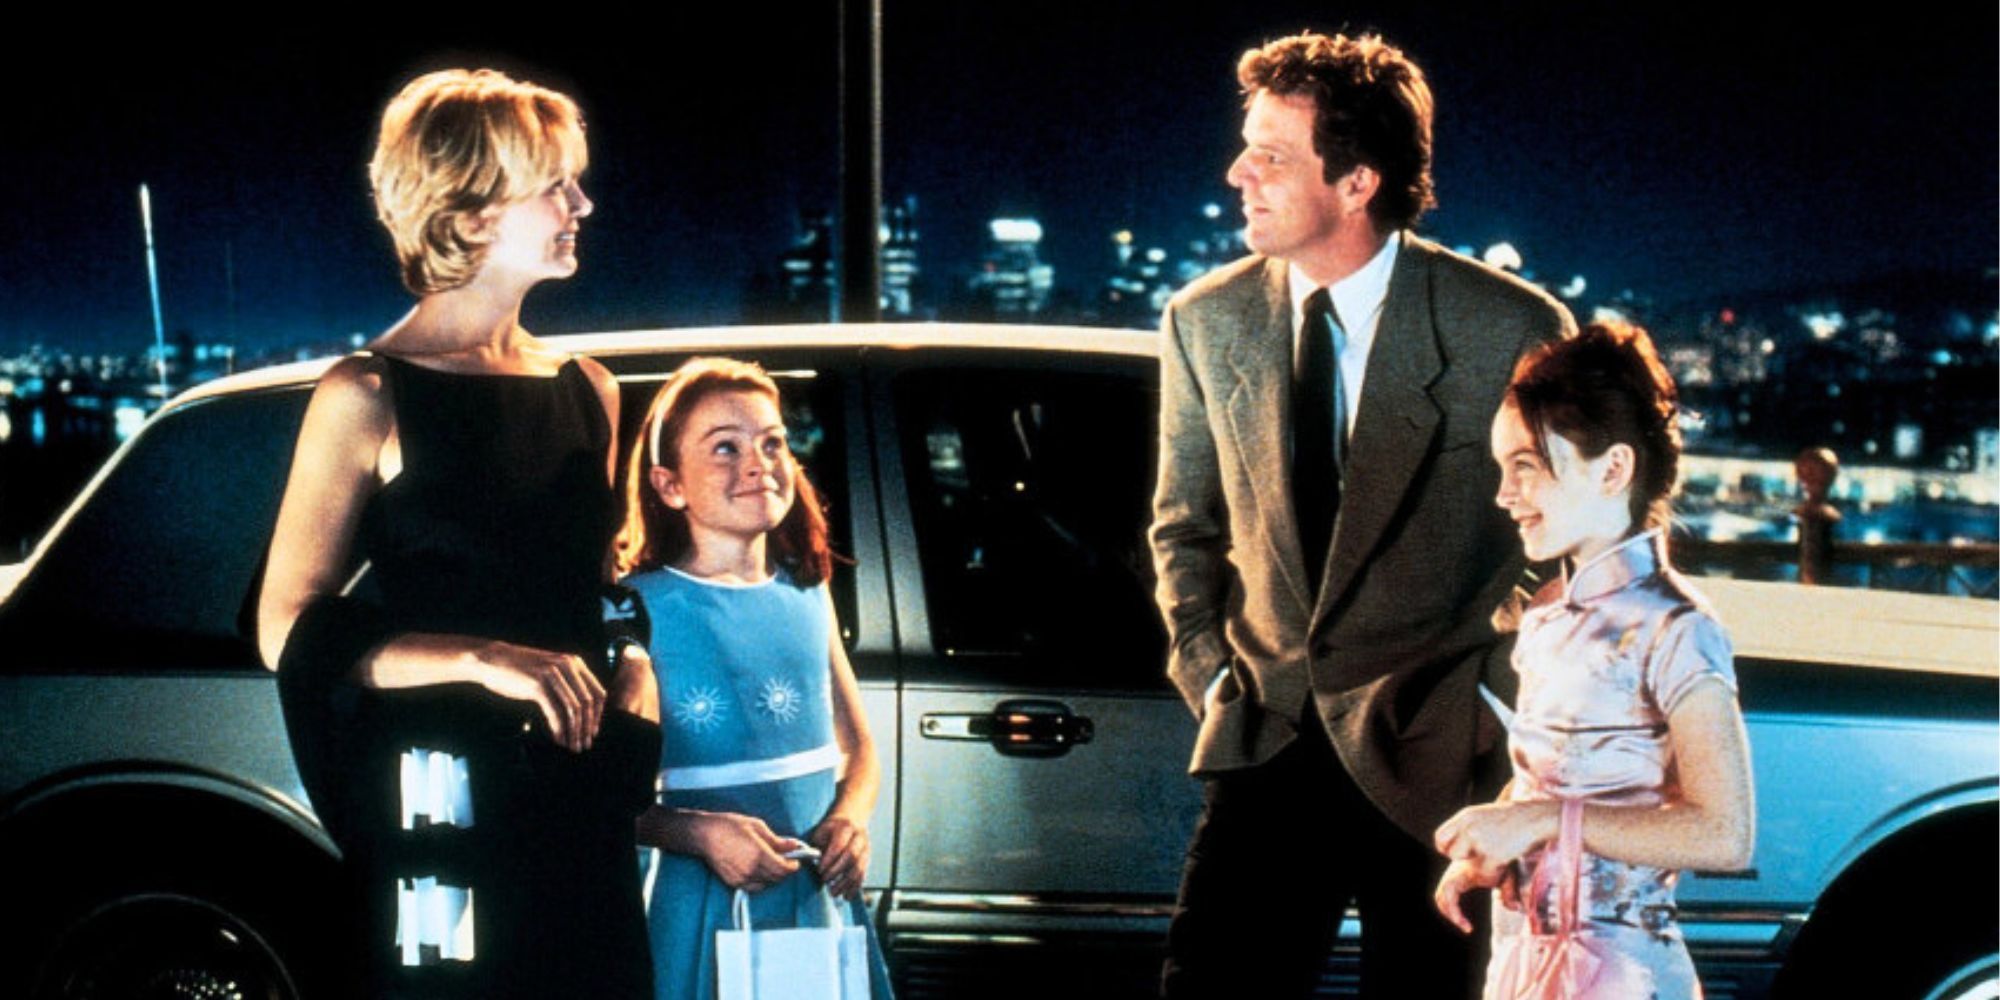 Natasha Richardson, Lindsey Lohan and Dennis Quaid standing next to each other in front of a limo in The Parent Trap (1998)